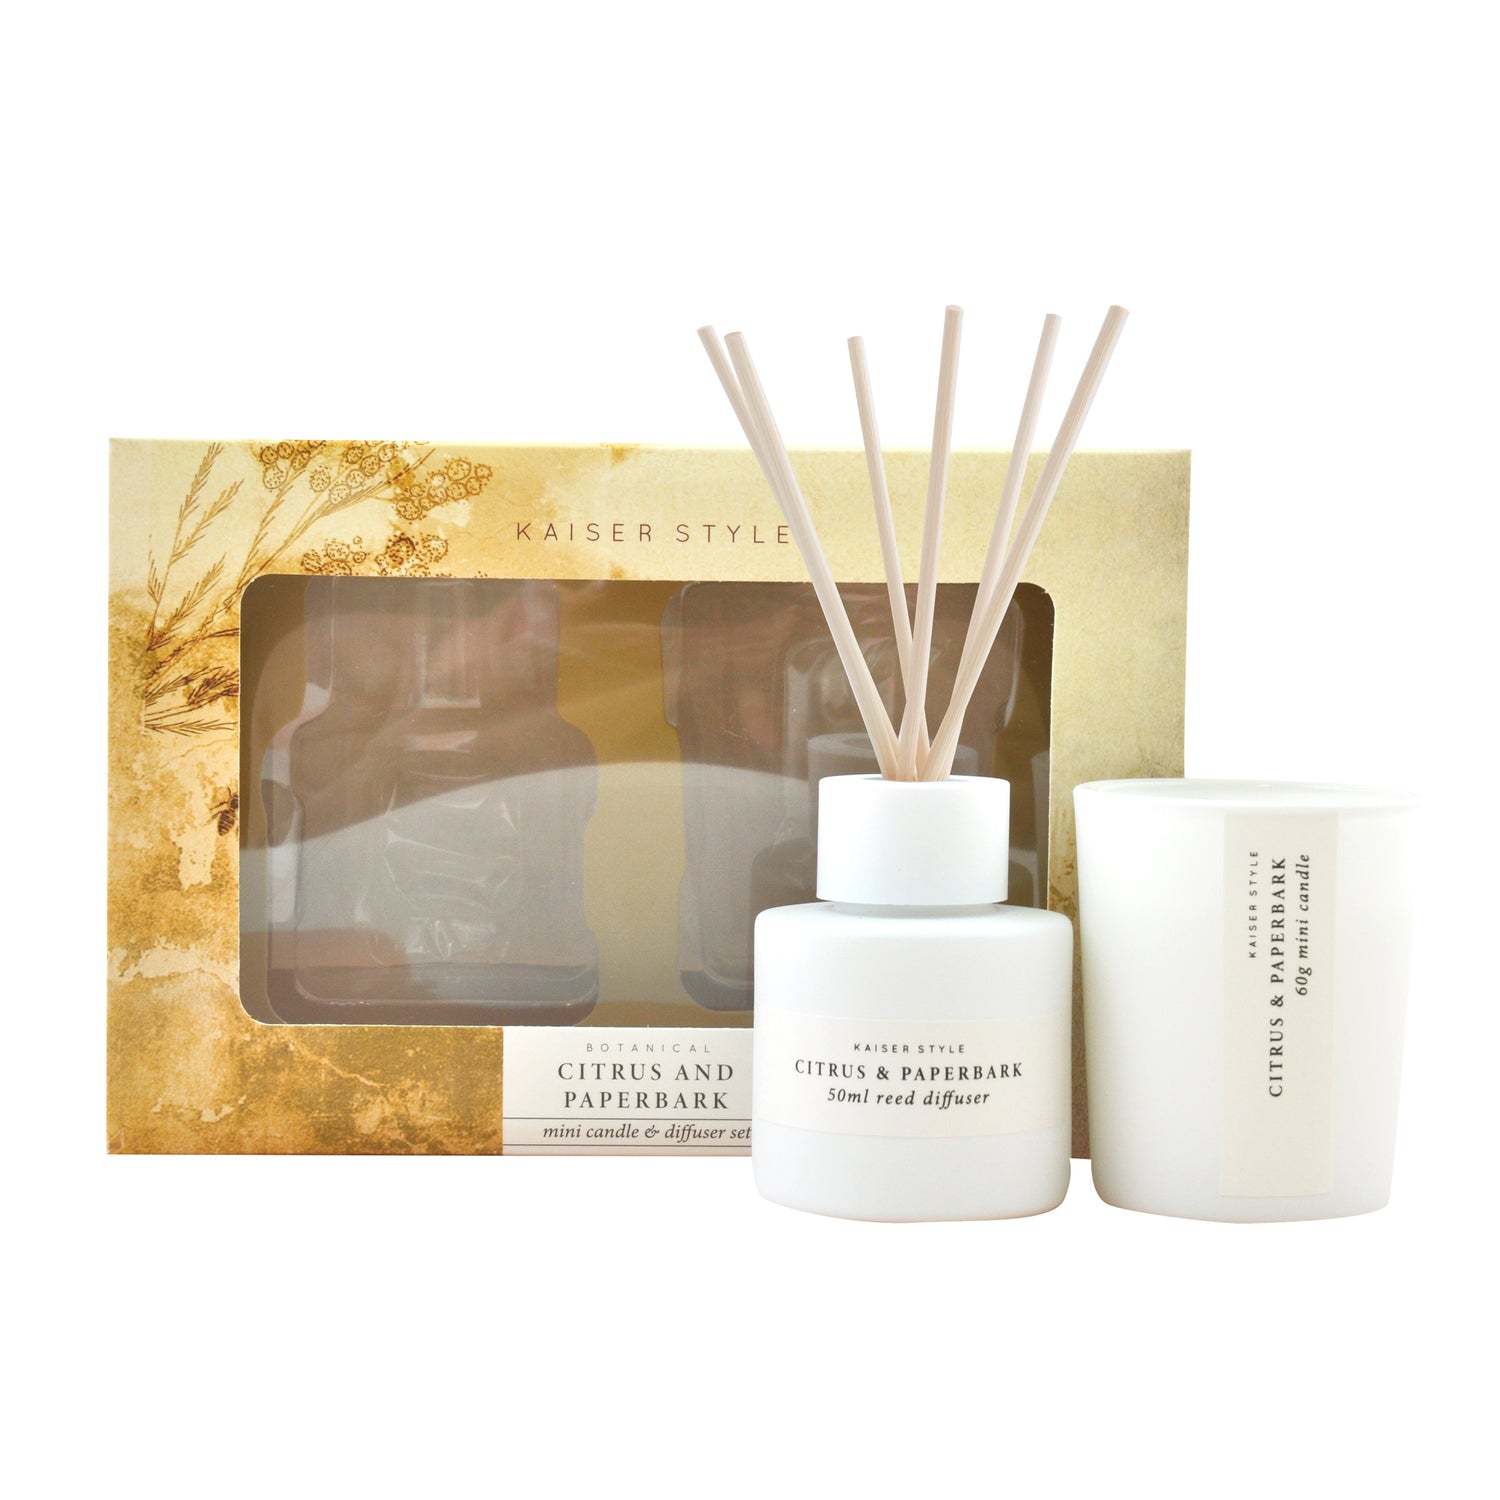 Home - Diffusers - Diffuser Gift Packs